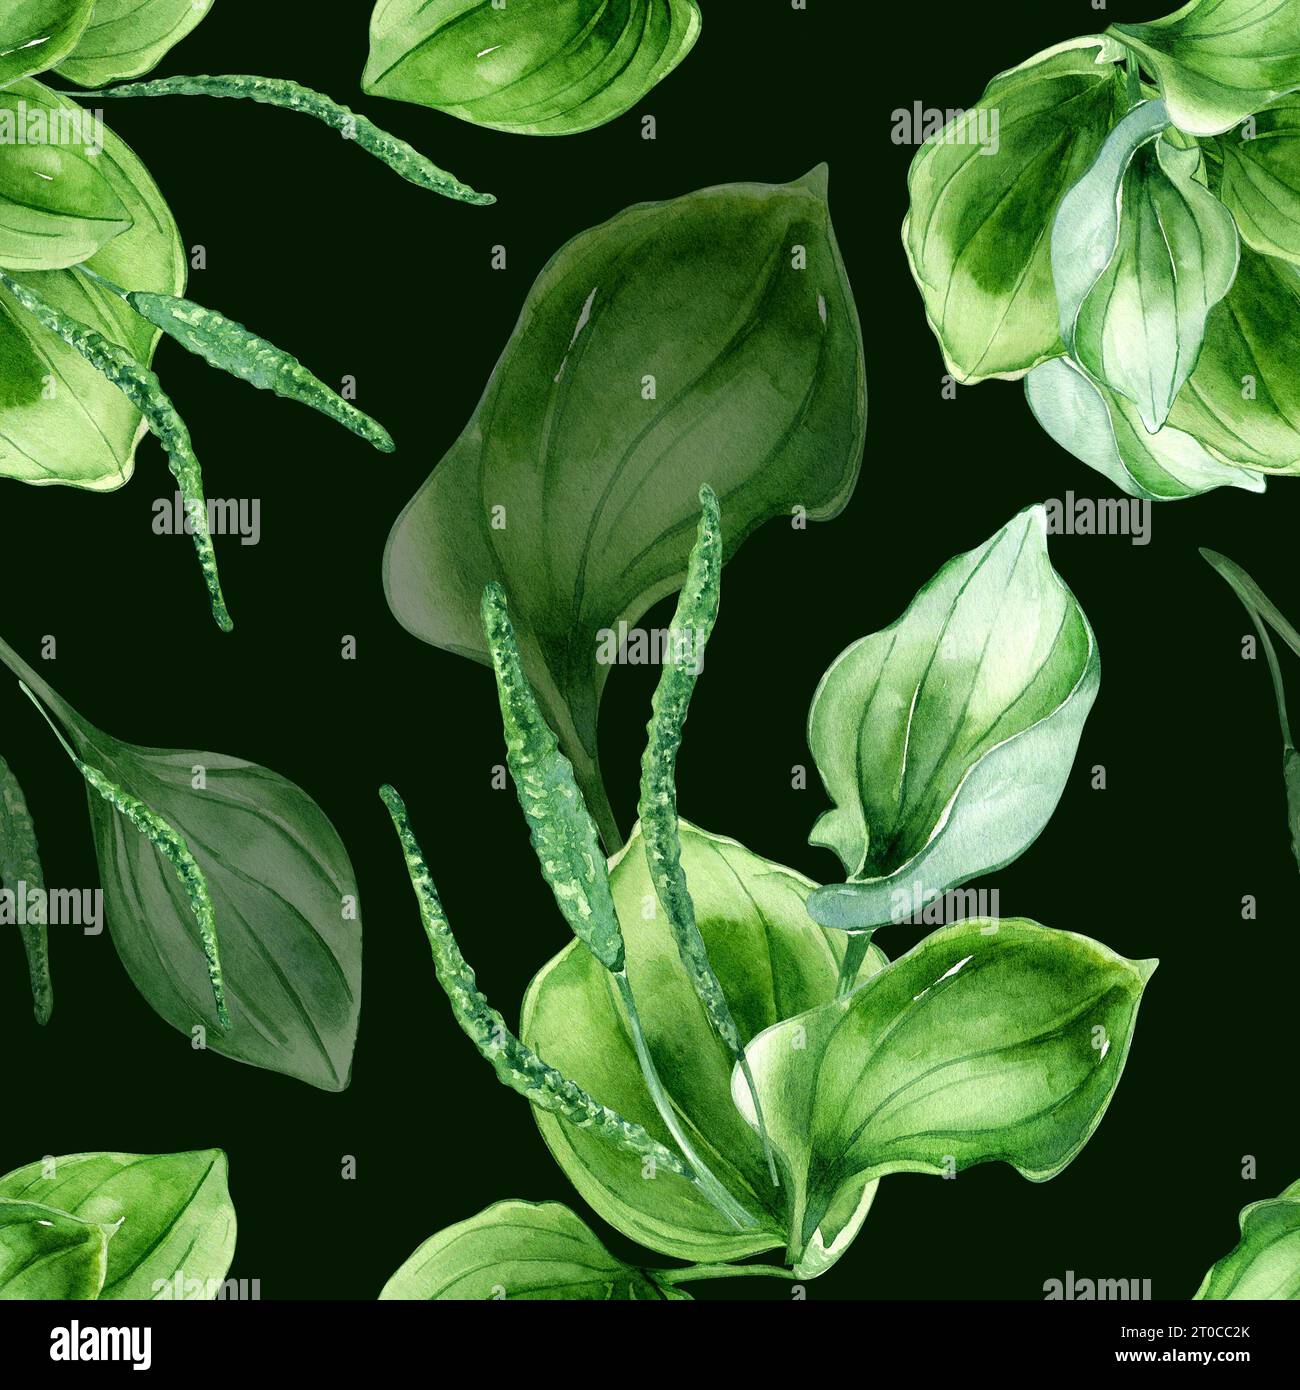 Plantago broadleaf medicinal plant watercolor seamless pattern isolated on black background. Plantain, green leaves, herb, psyllium hand drawn. Design Stock Photo